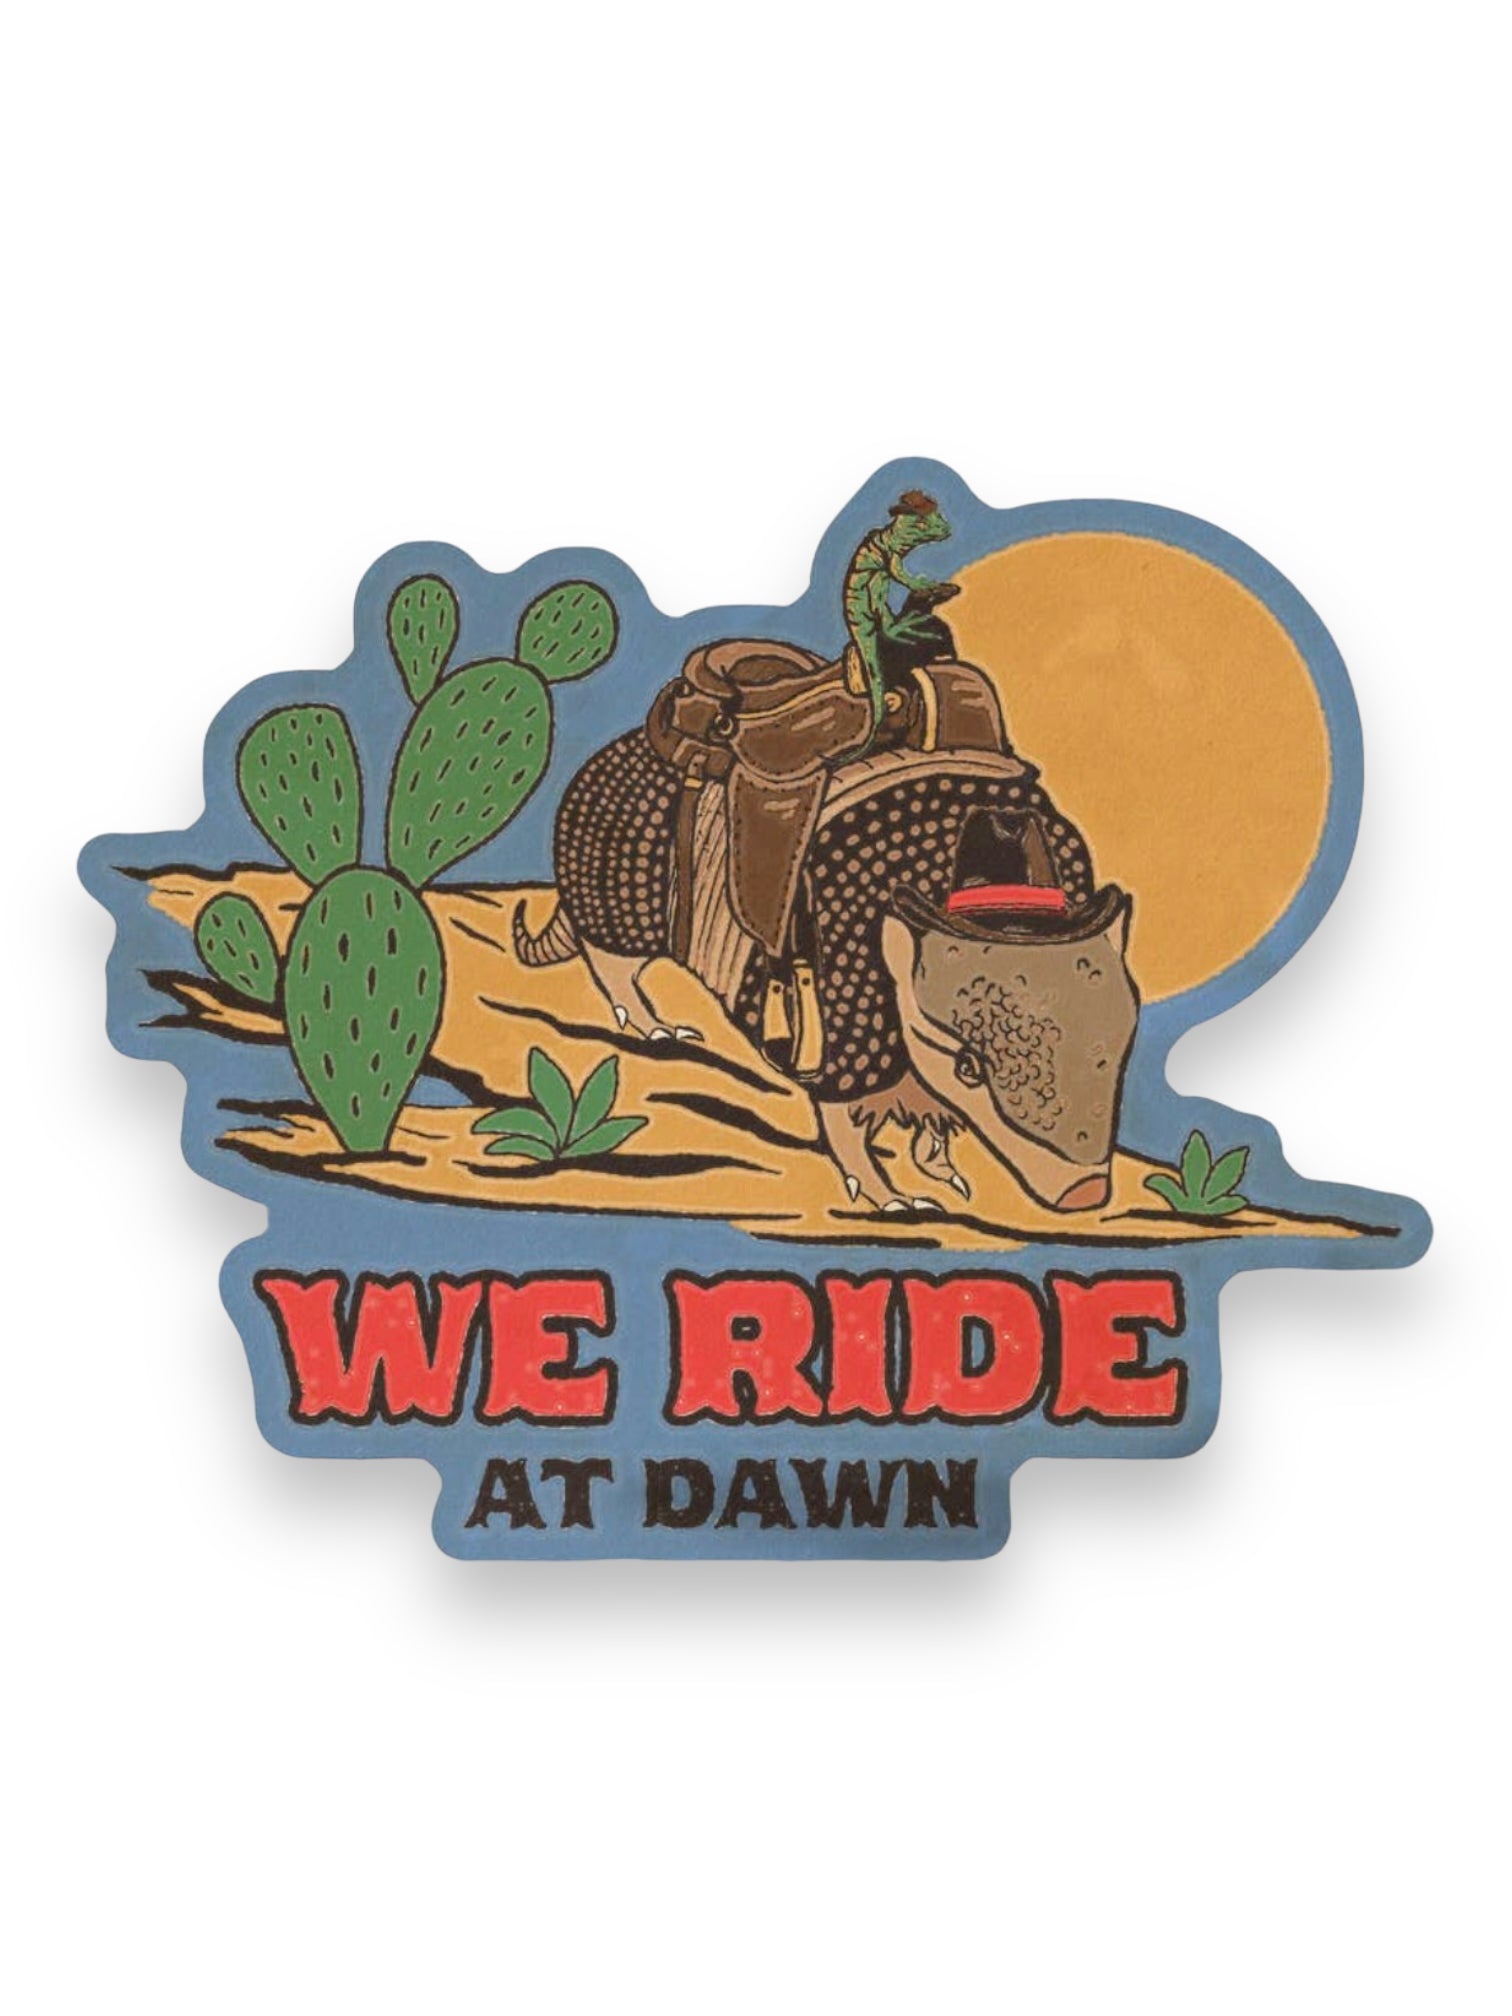 We Ride At Dawn Armadillo Cowboy Sticker by Clusterfunk Studio Sold by Le Monkey House